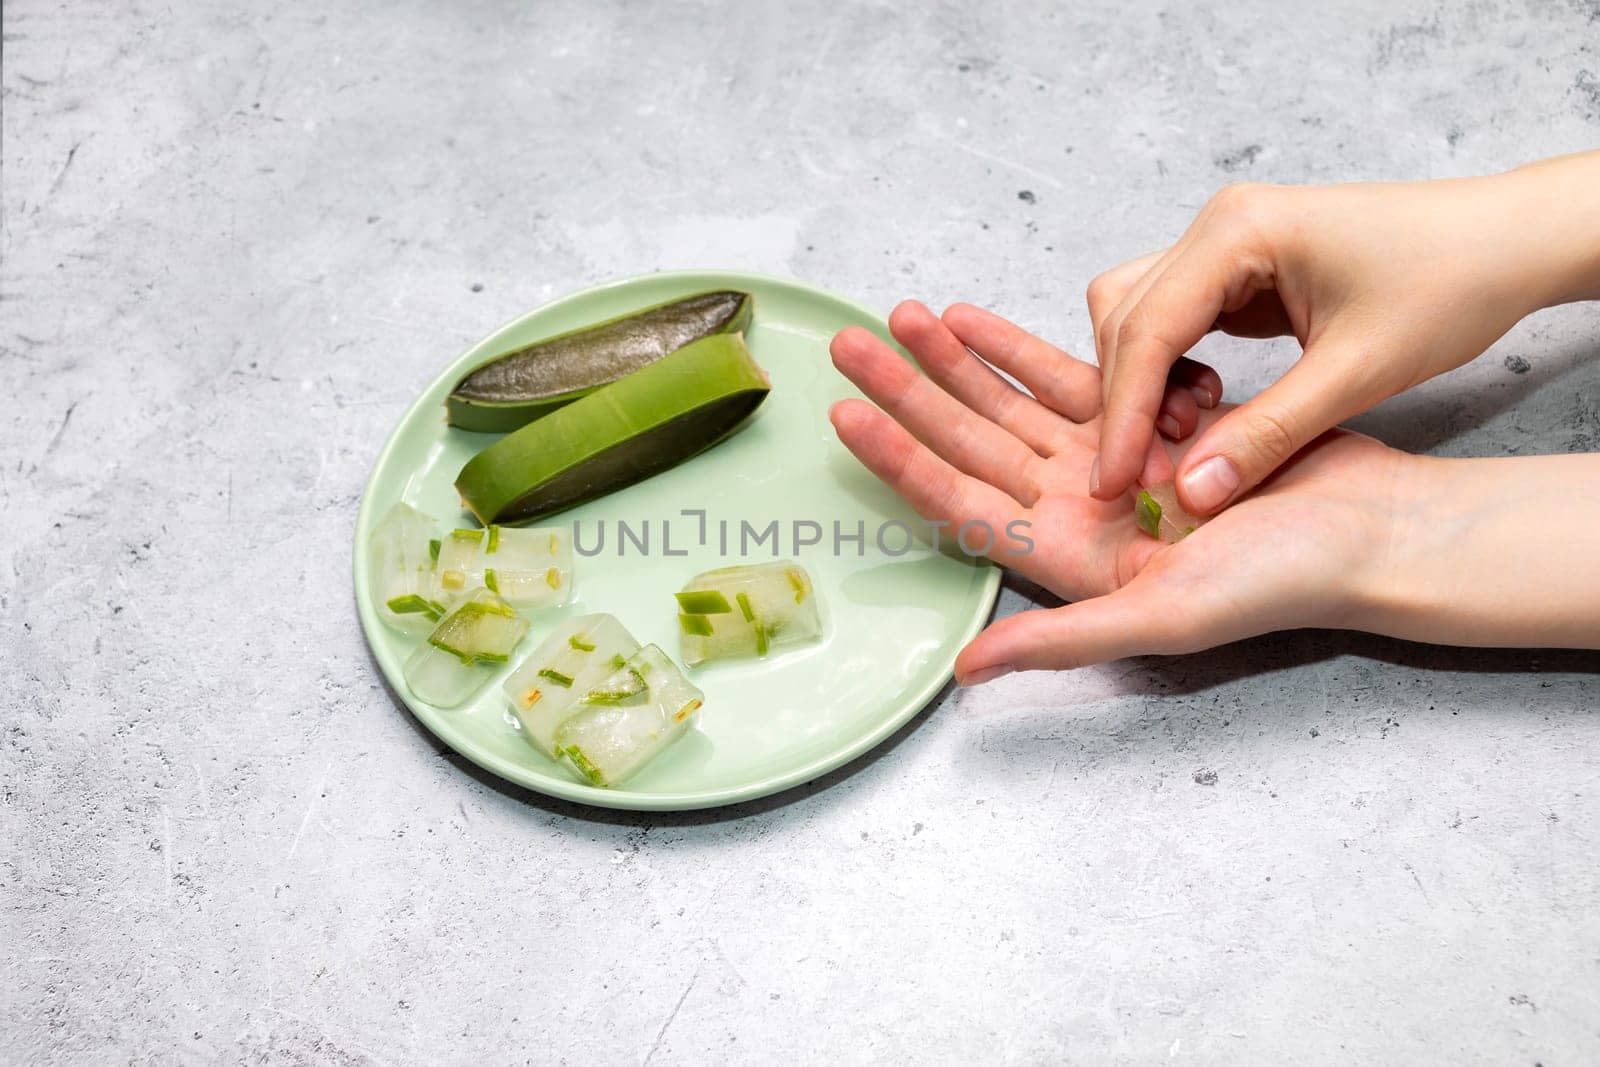 Top View Woman's Hand Holding Aloe Juice Ice Cubes, Aloe Vera Plant On Green Plate On Table. Flat Lay Horizontal plane. Natural Homemade Cosmetics, DIY Concept. Food, Medicine And Beauty Industry by netatsi